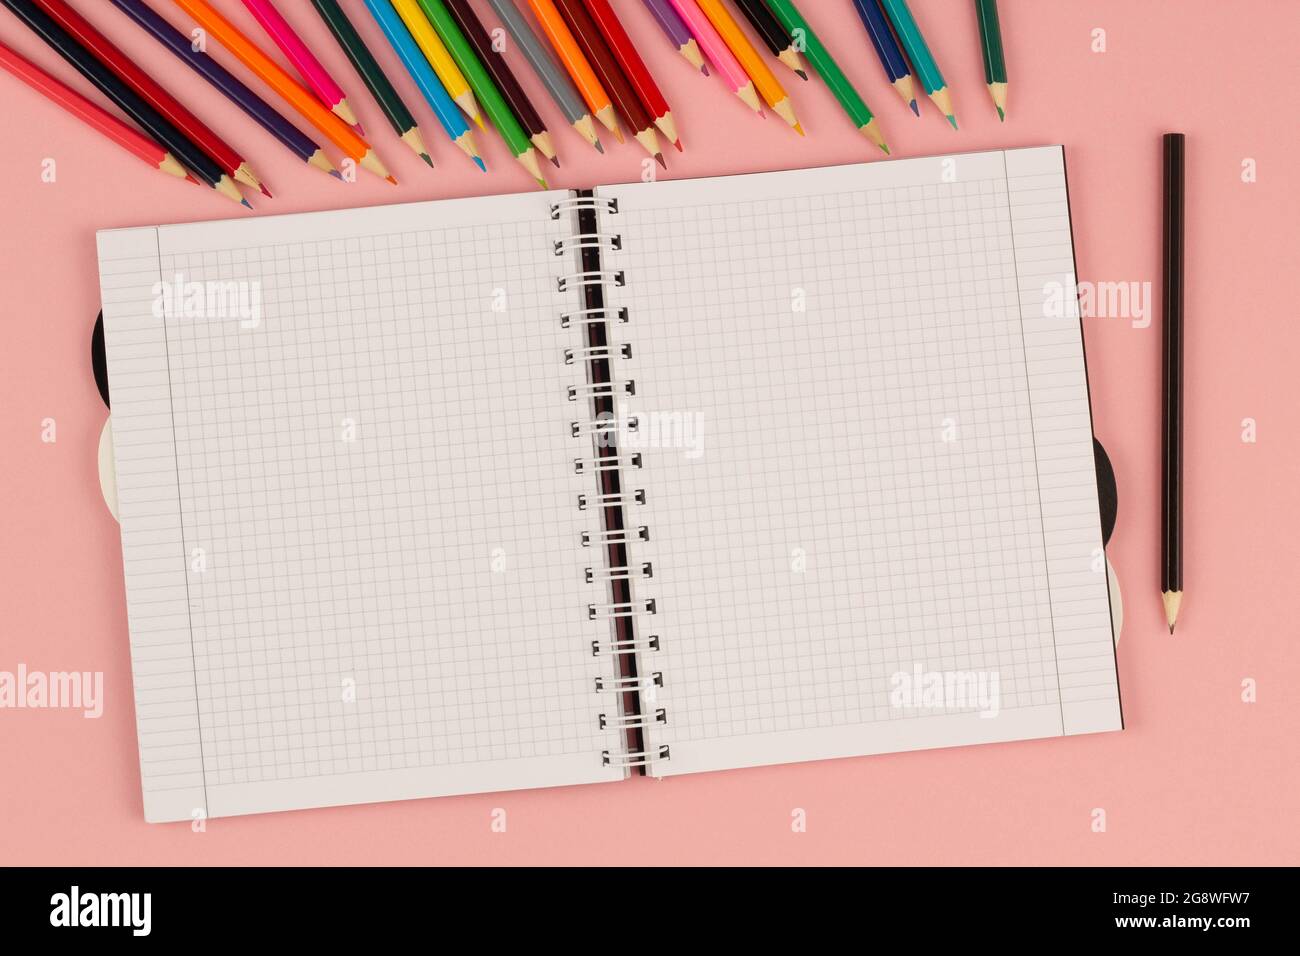 Open school squared notebook and colorful pencils on the pink background. Blank white sheet of paper book on the table. Office supplies on the desktop Stock Photo